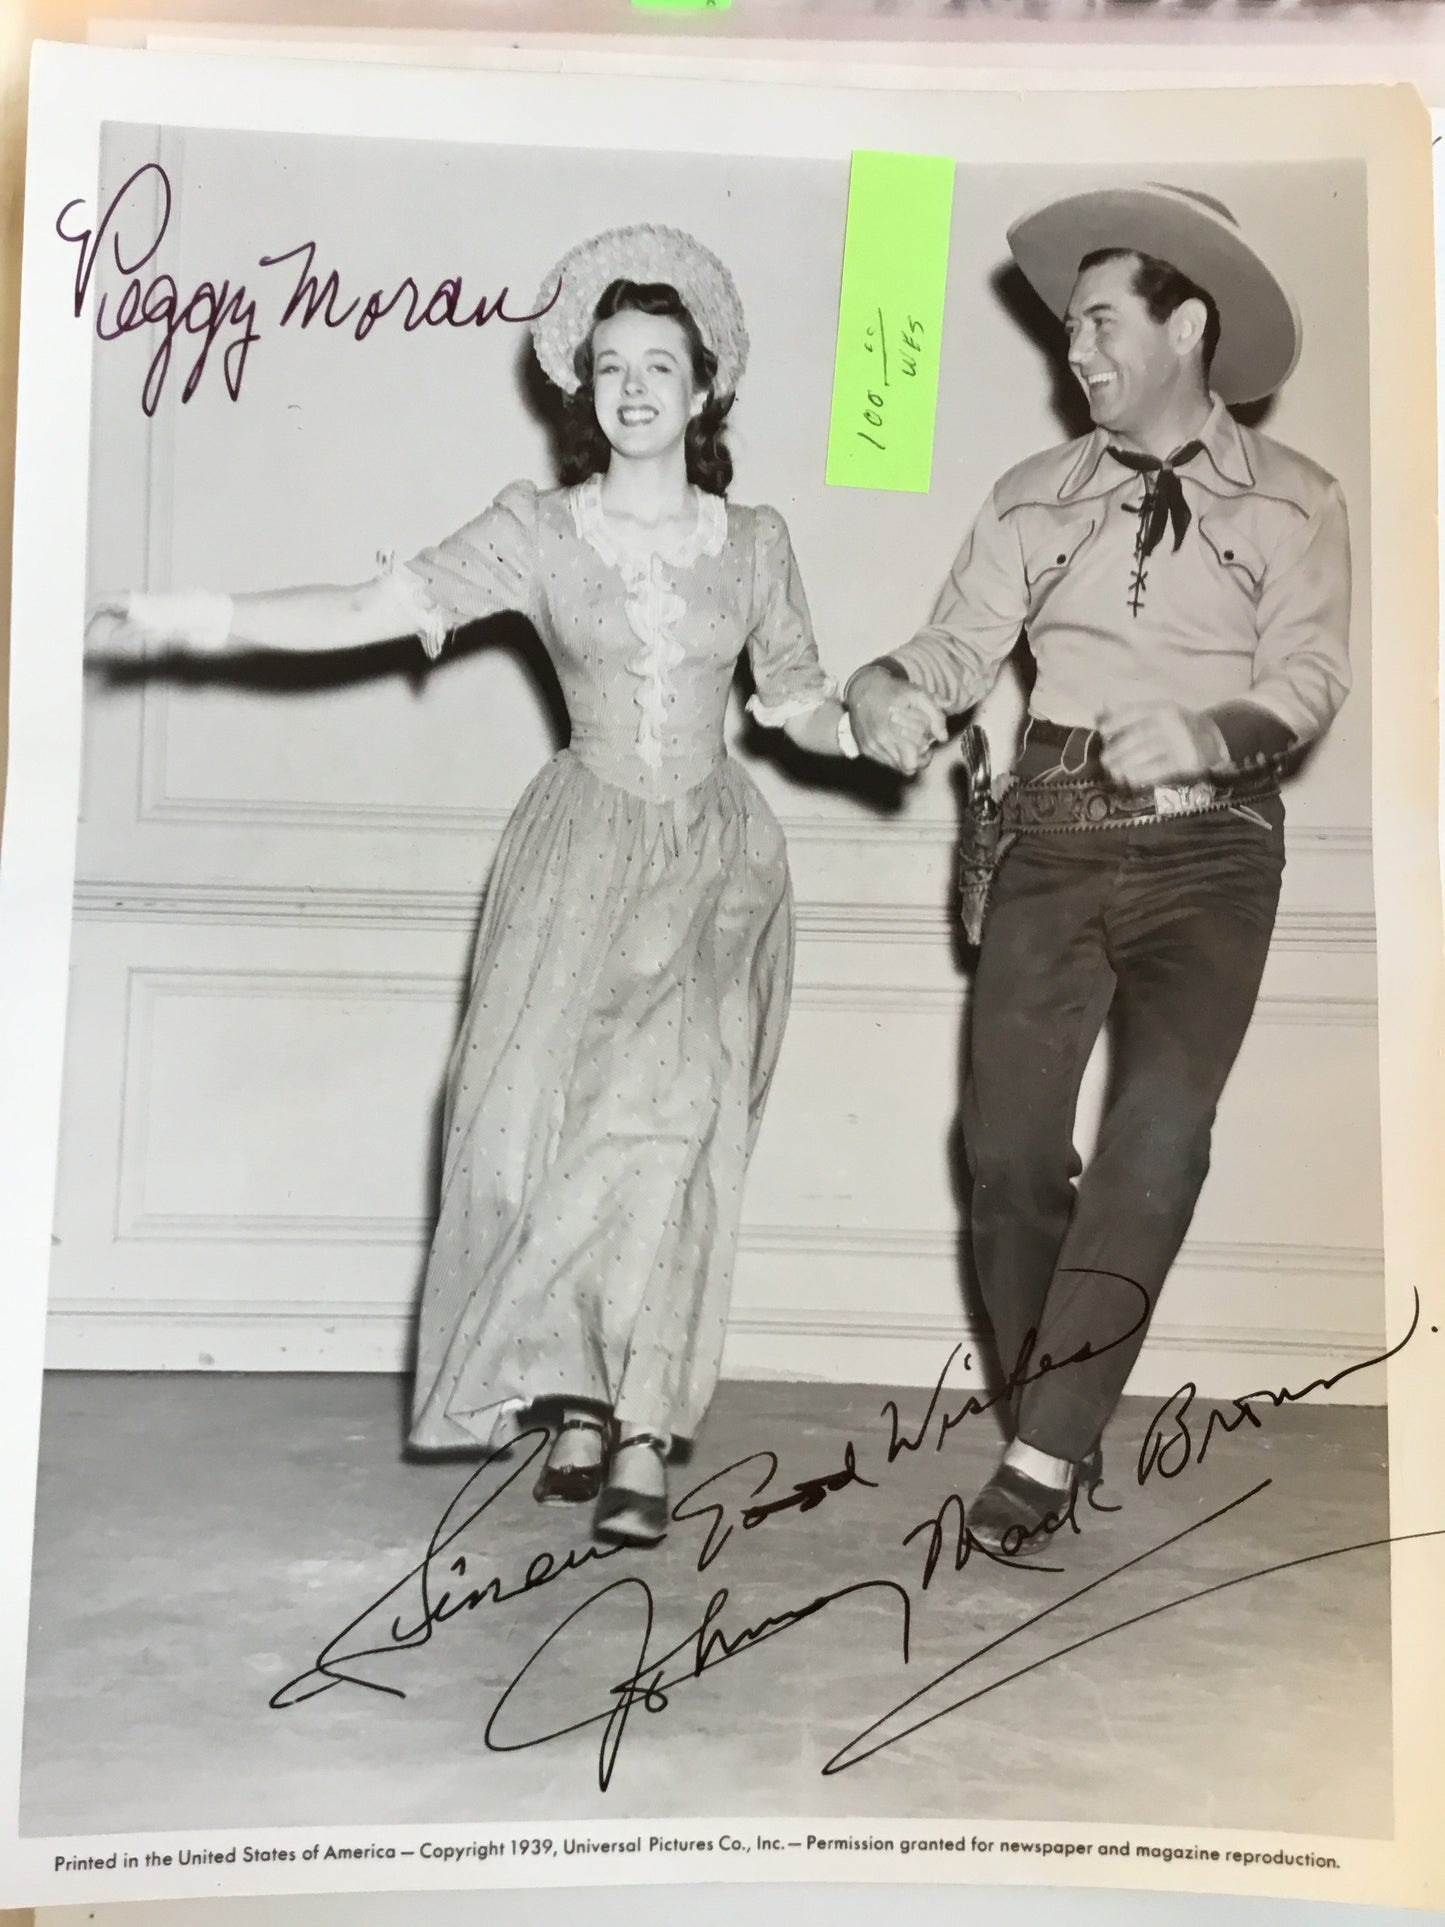 Johnny Mack Brown and Peggy Moran, autographs